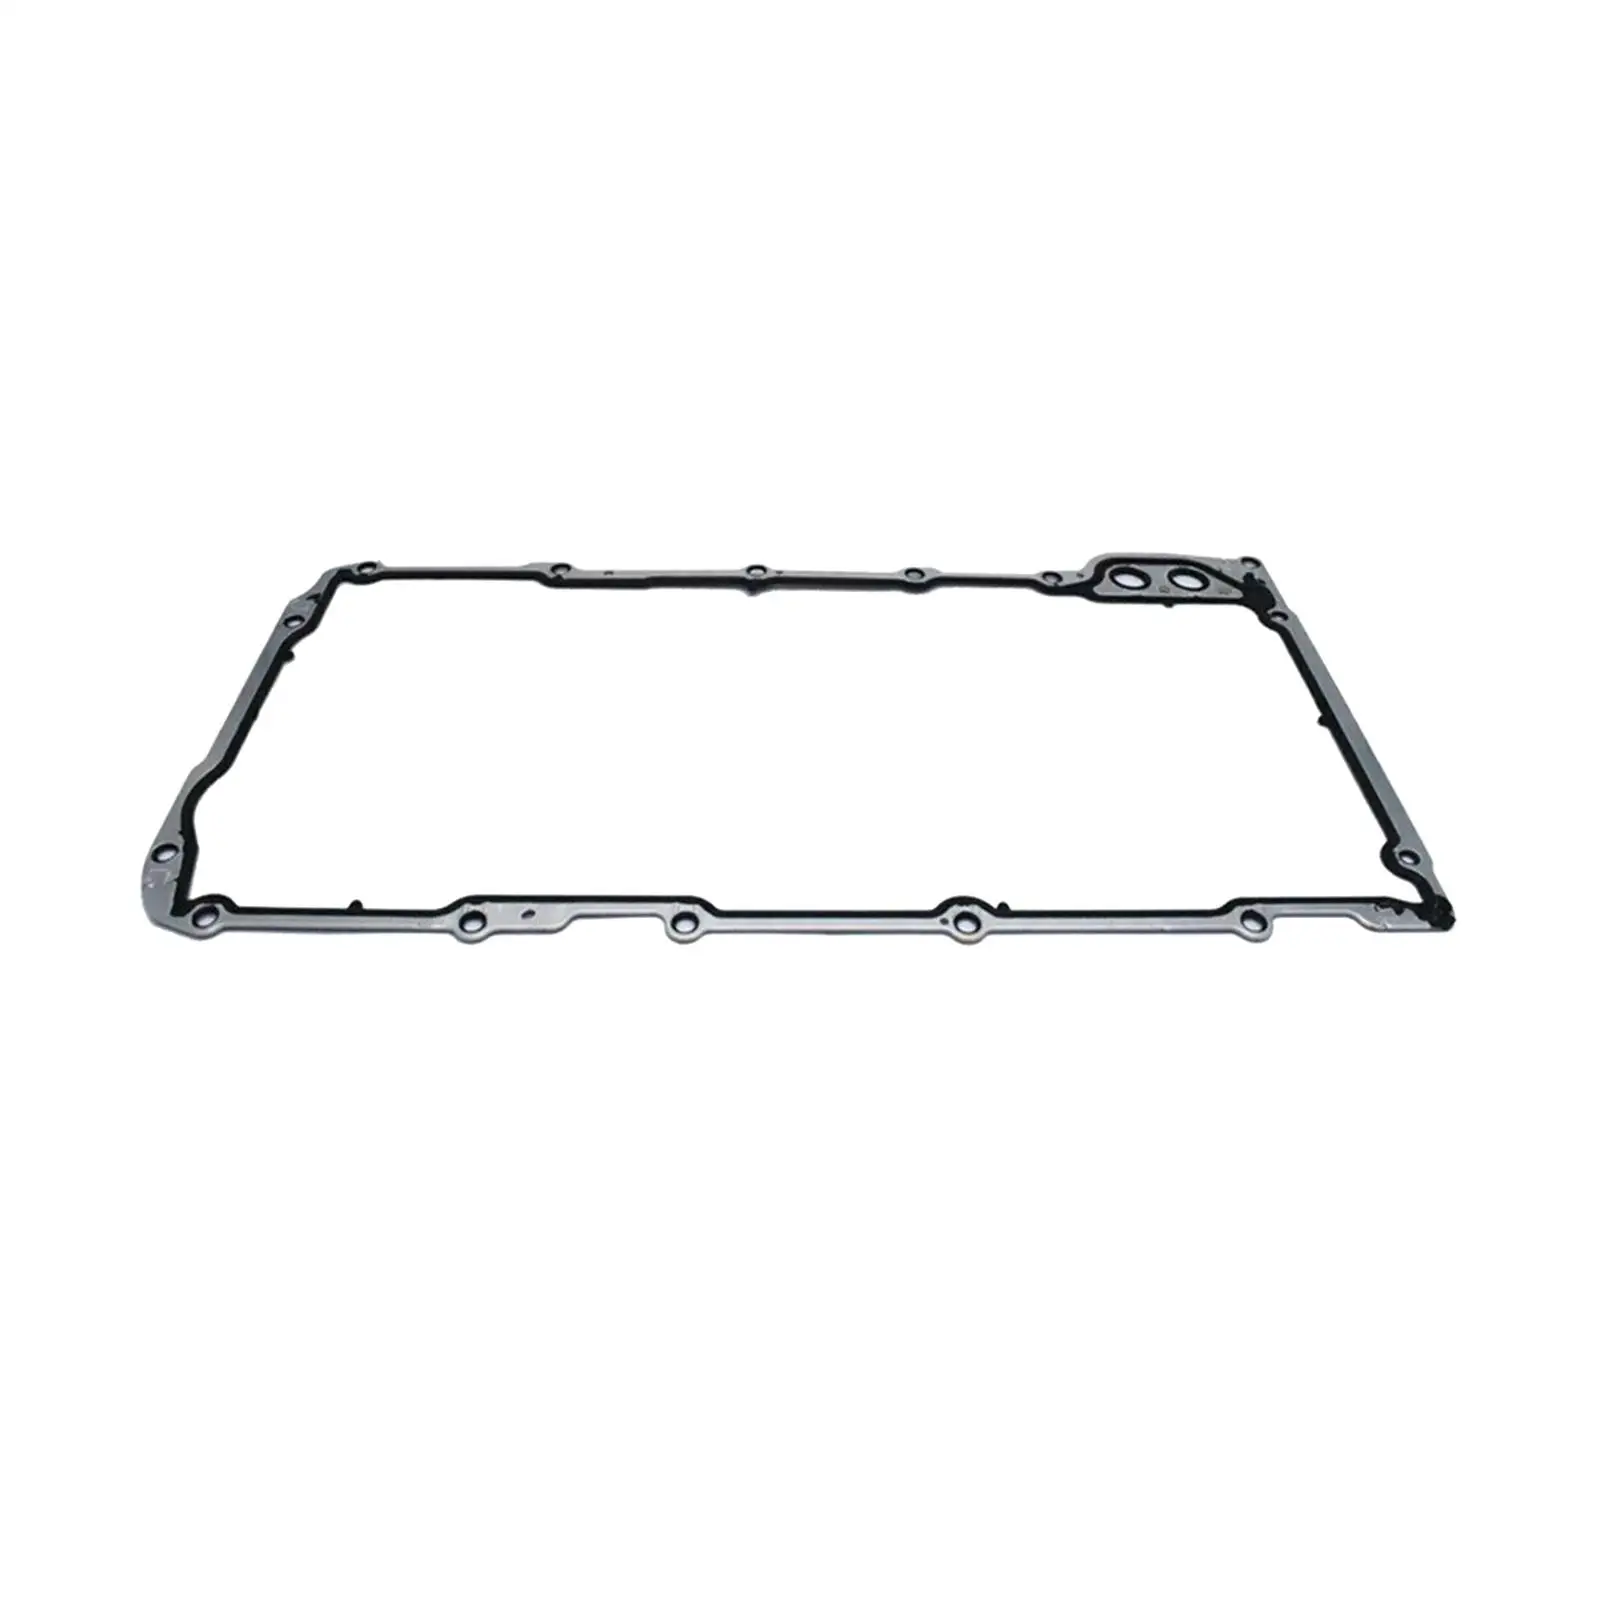 Oil Pan Gasket OS32241 OS30693R for Hummer Spare Parts High Performance